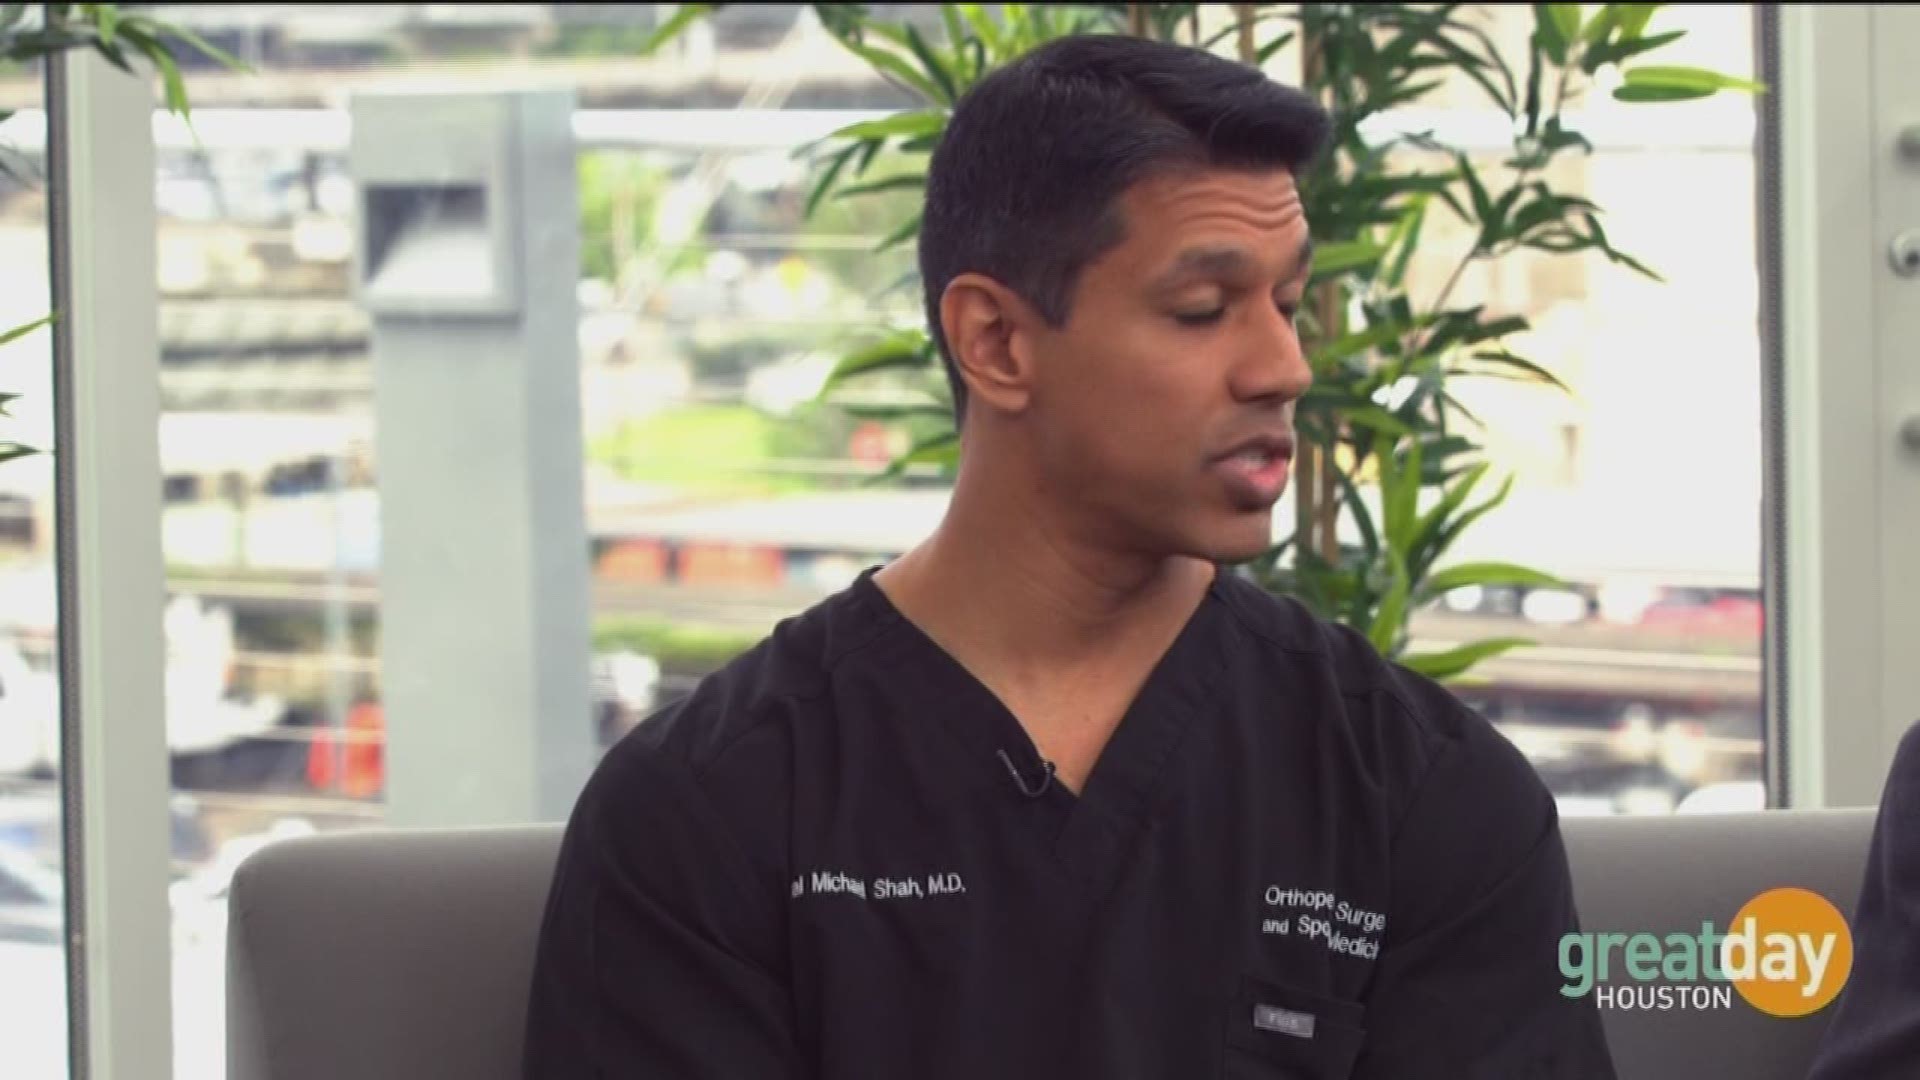 Orthopedic Surgeon,  Dr. Vishal Shah with Memorial Hermann Sugar Land Hospital discusses options for knee surgery and how it helped his patient Phillip Riopelle"leap" for joy.